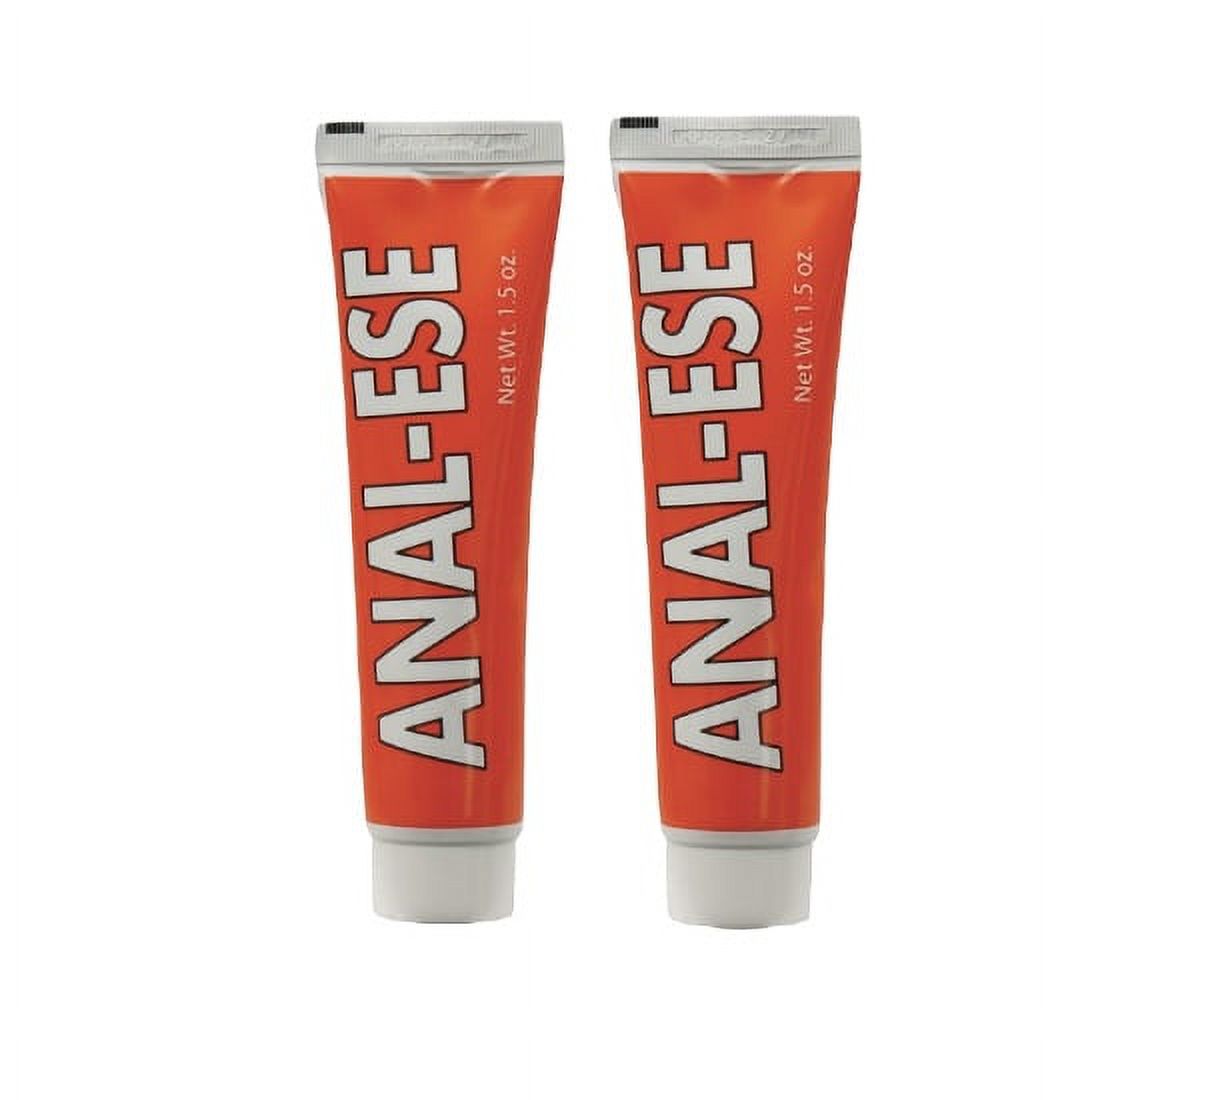 Anal-Ese - 1.5 oz. (Pack of 2) - image 1 of 3